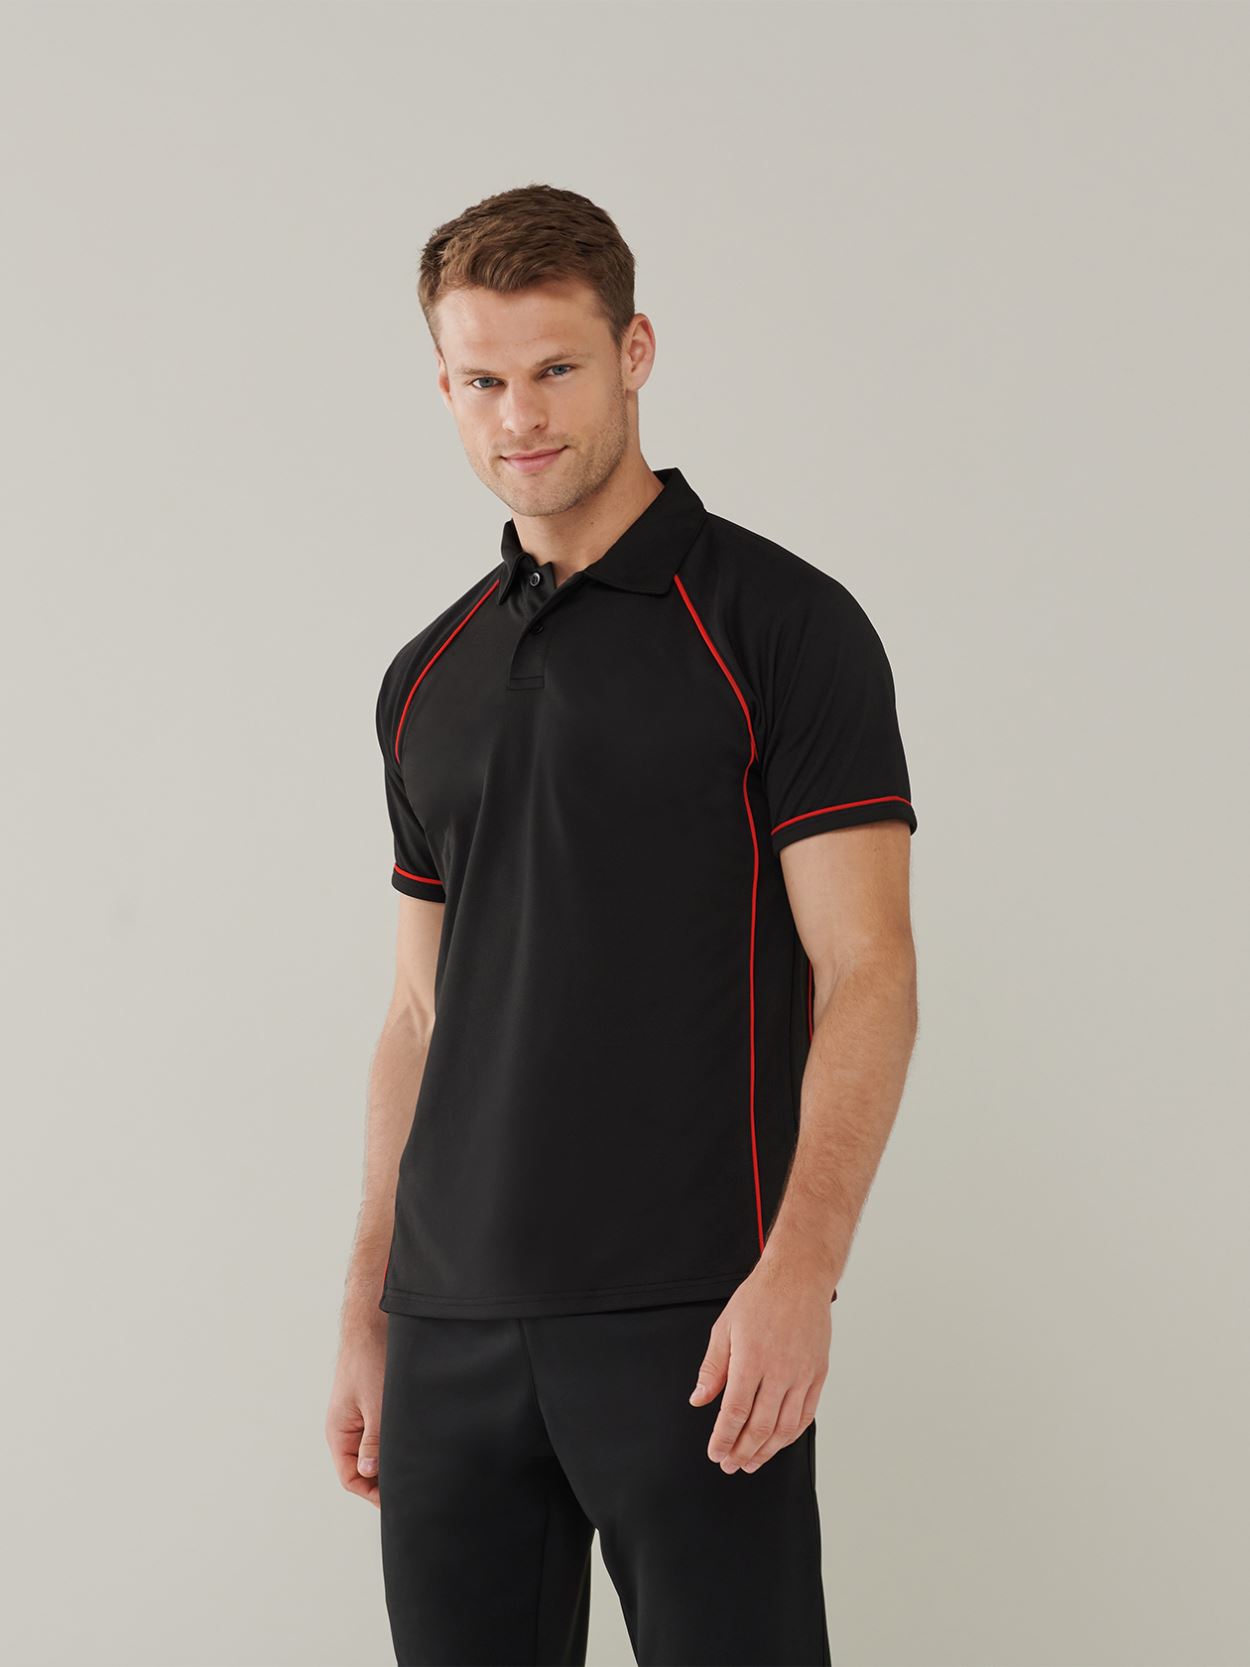 LV370 Piped Performance Polo Image 2